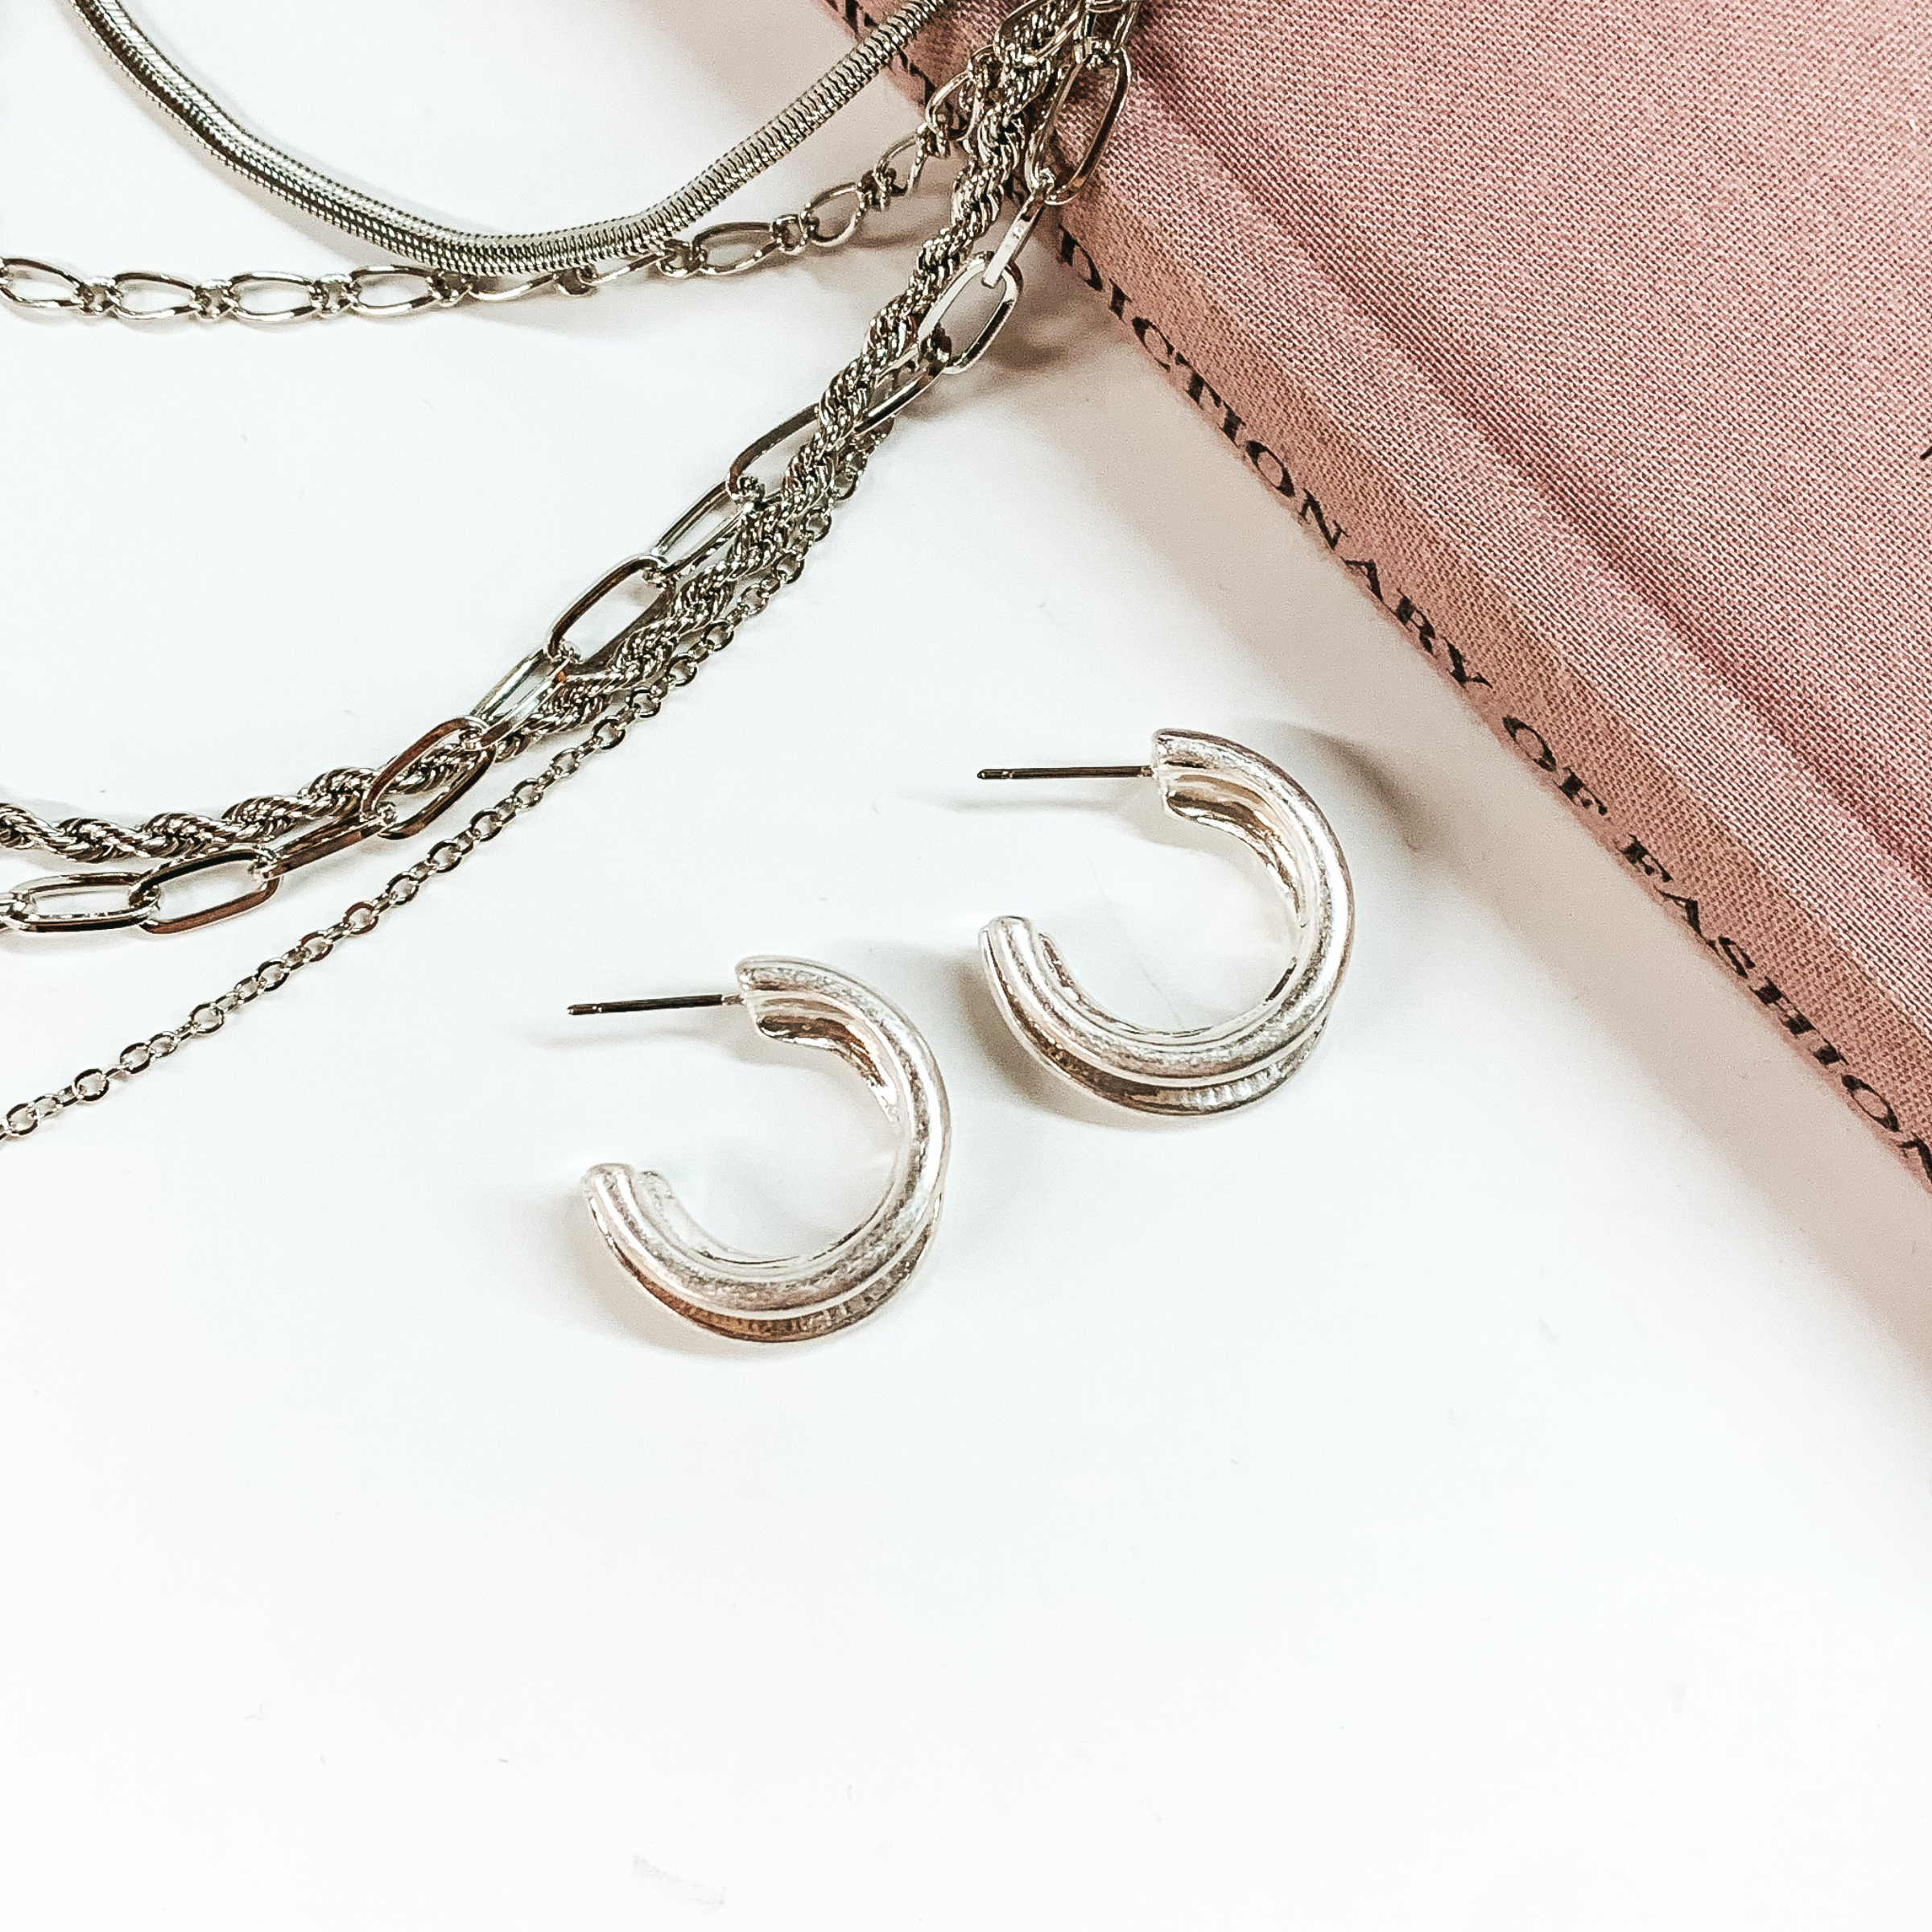 Layered Hoop Earrings in Silver Tone - Giddy Up Glamour Boutique